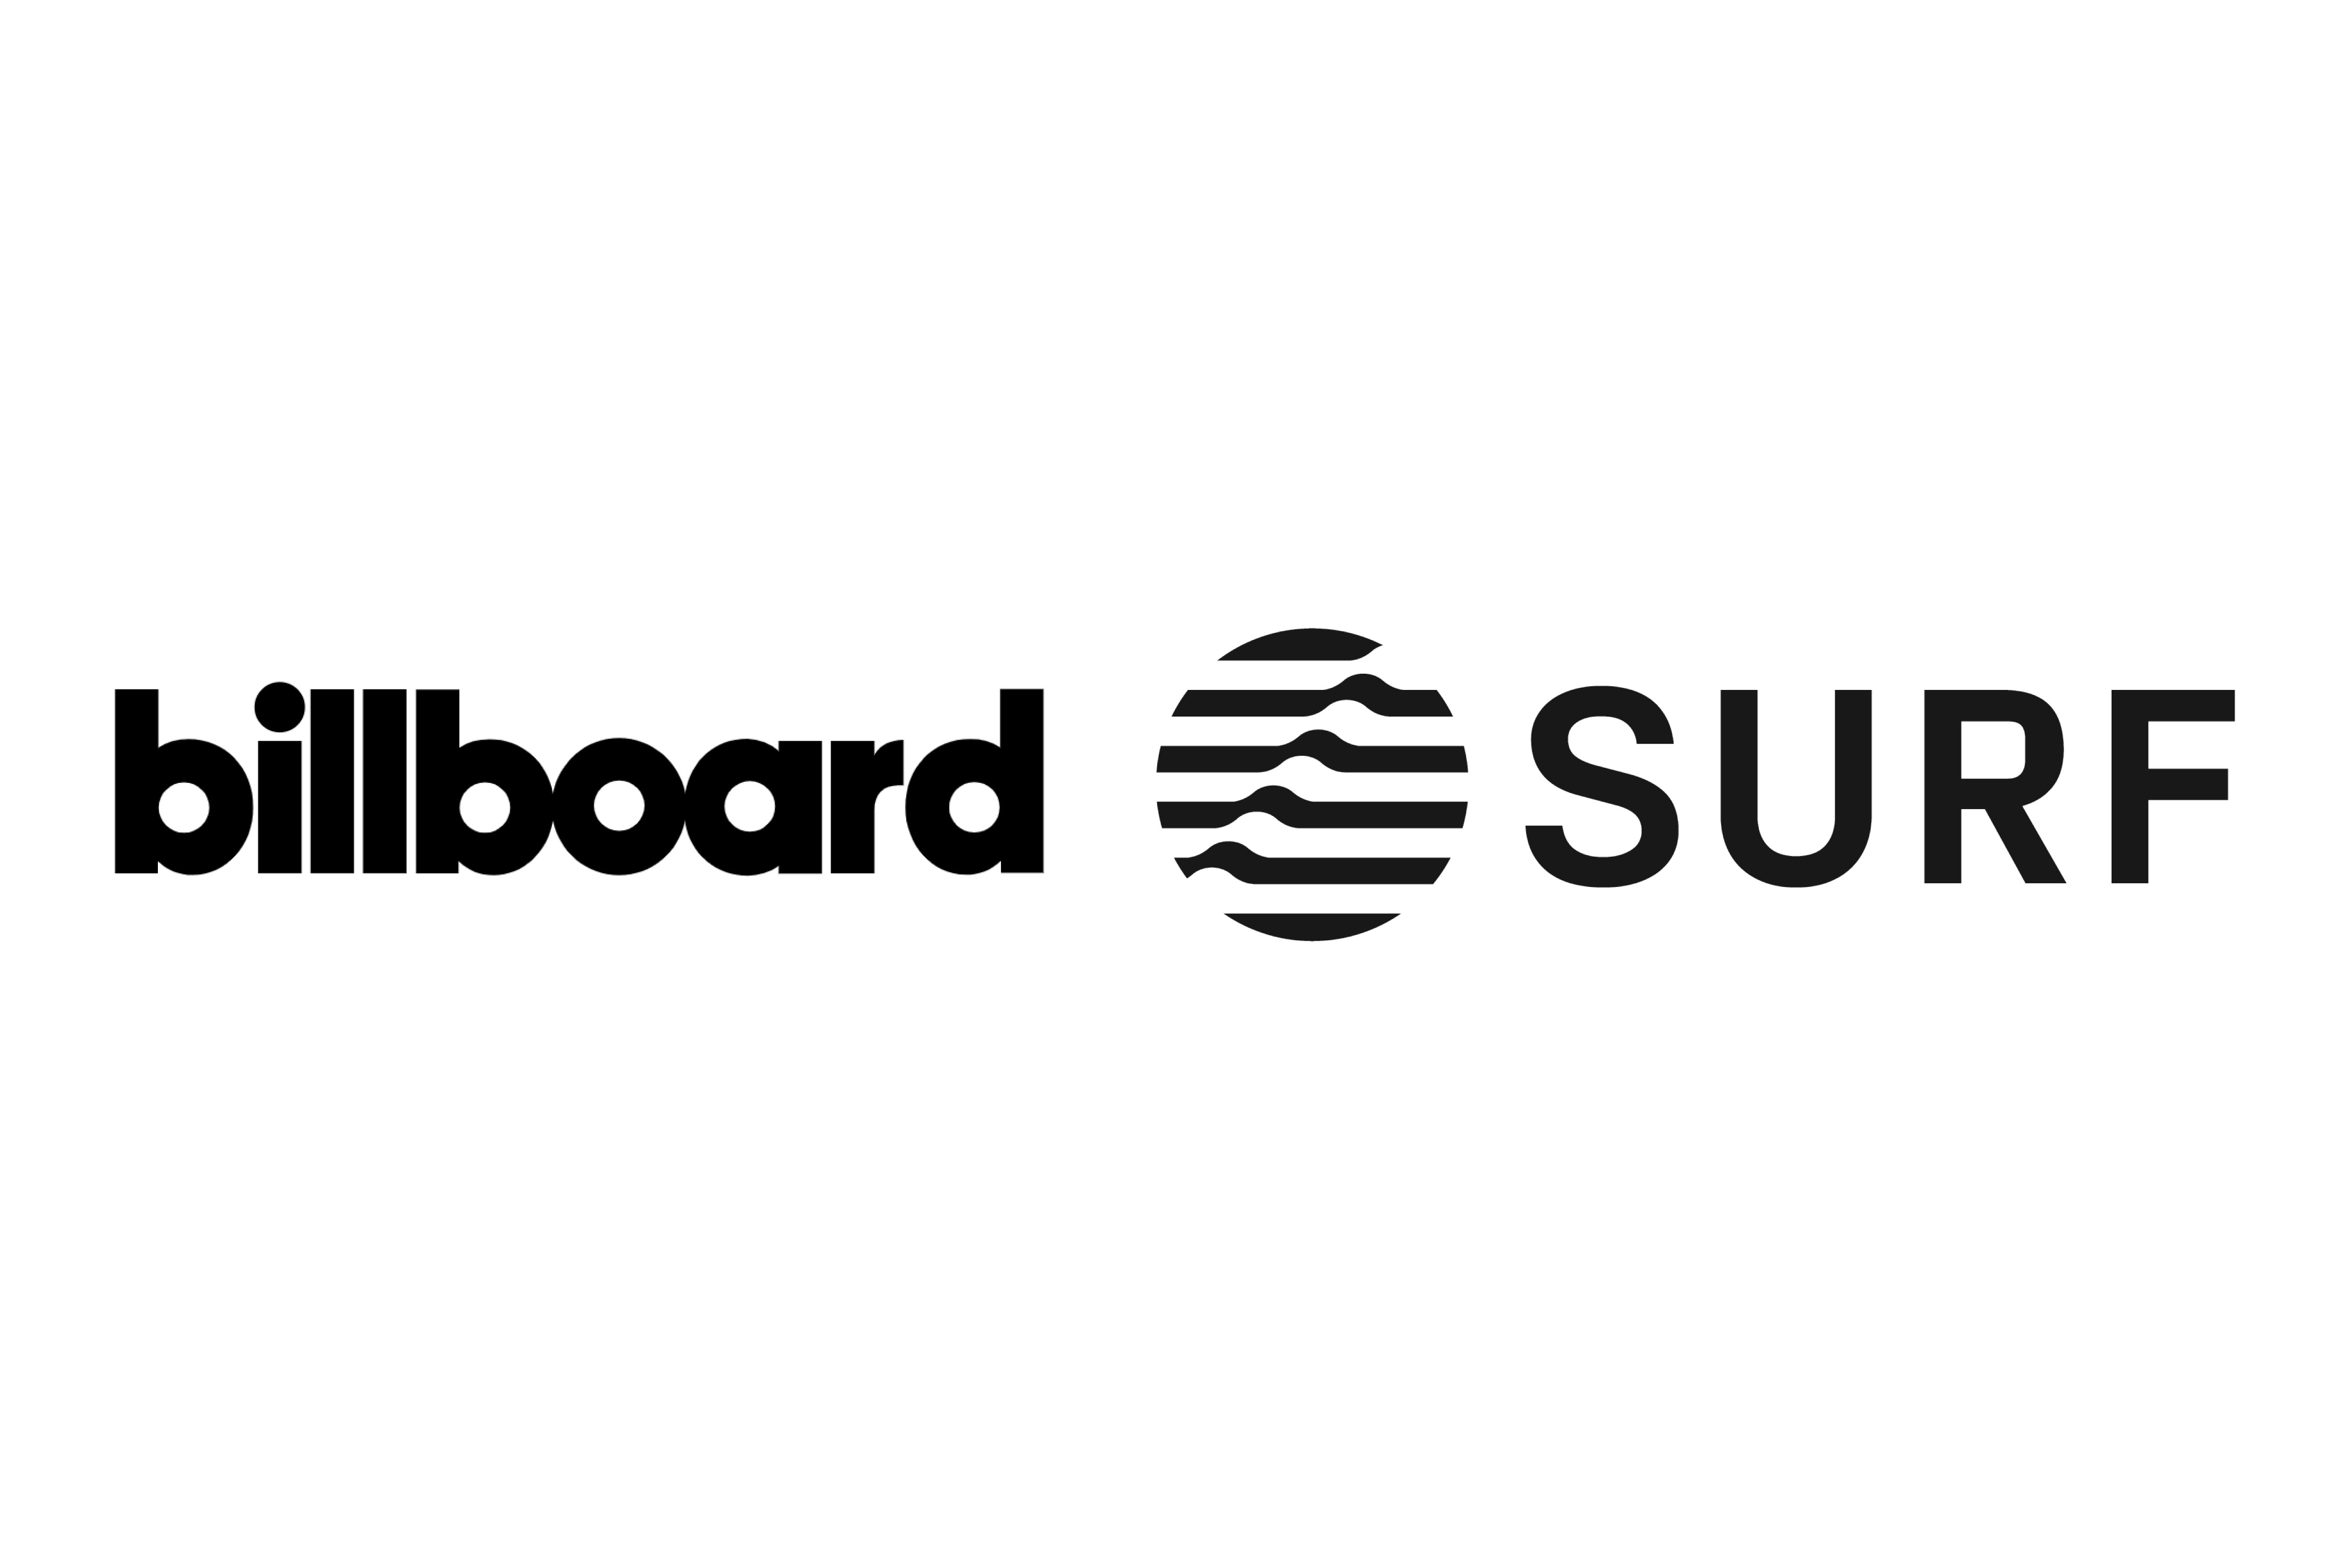 Billboard: SURF Music Sources Theme Song Performed by Lee Mujin for Busan In Their Bid To Host World Expo 2030